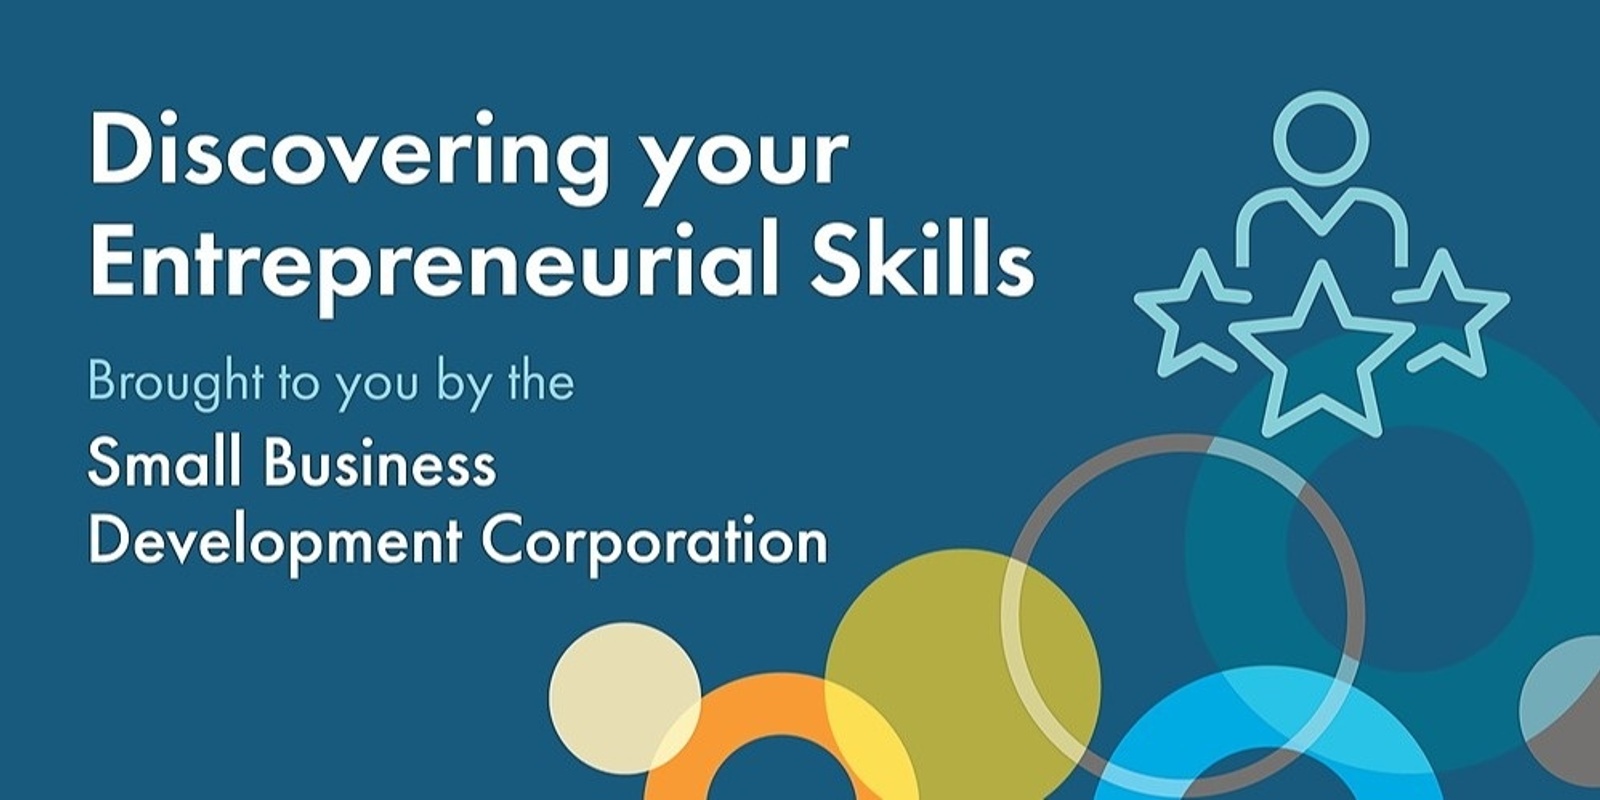 Discovering your Entrepreneurial Skills